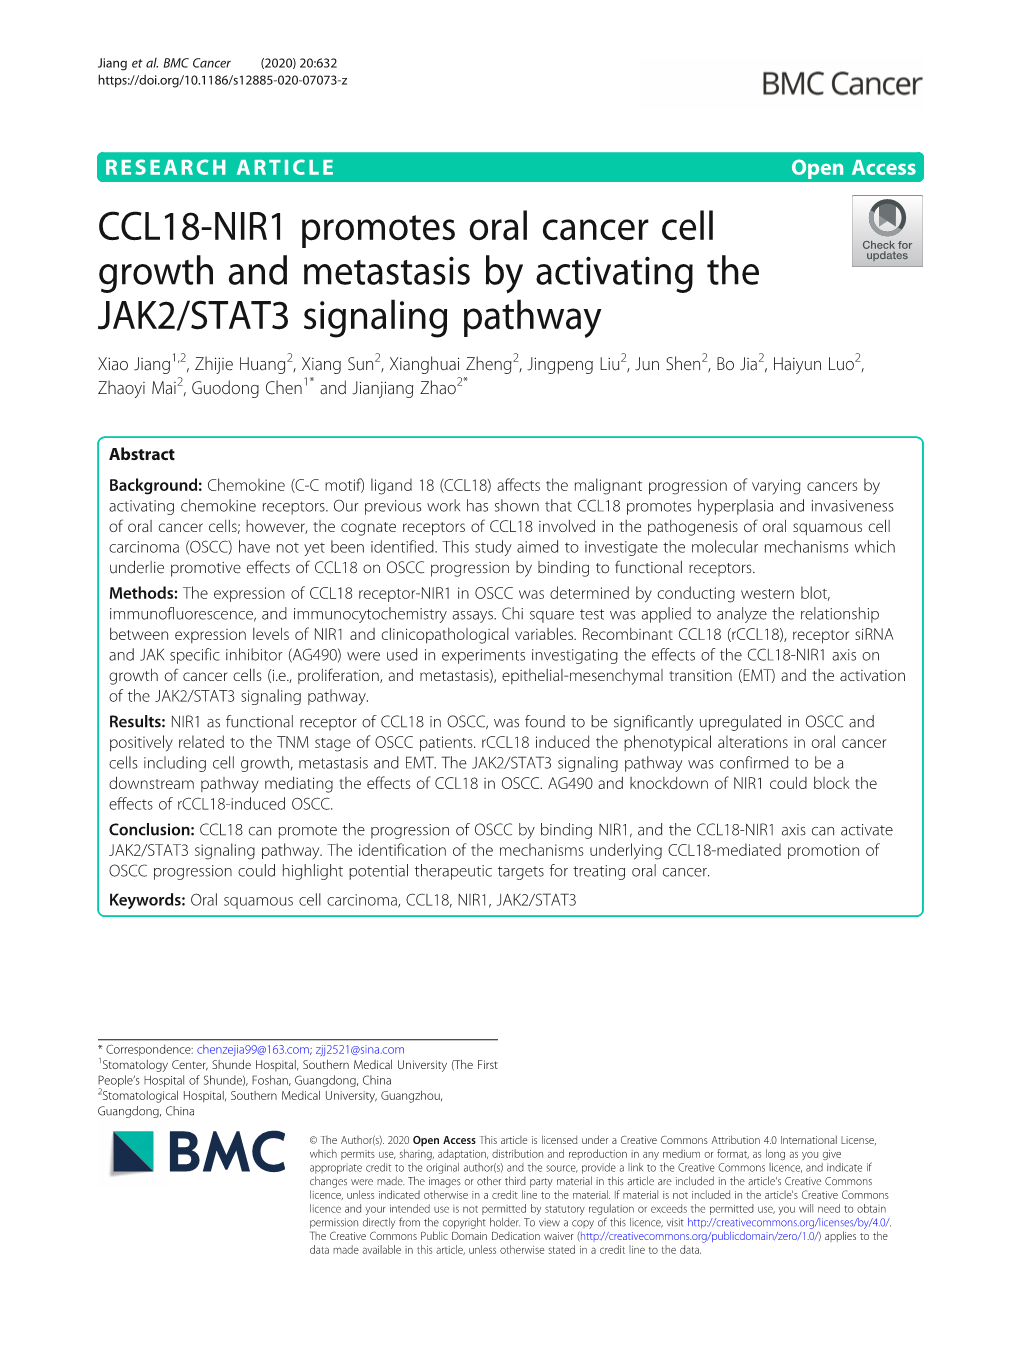 CCL18-NIR1 Promotes Oral Cancer Cell Growth and Metastasis By